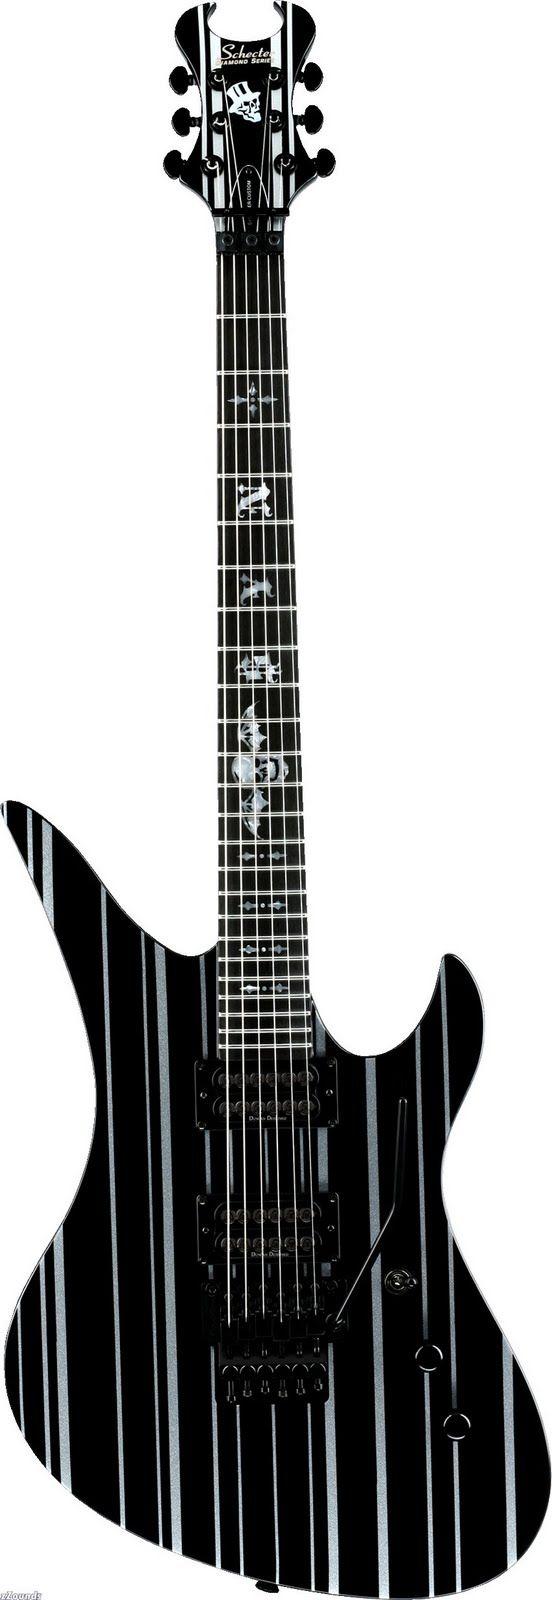 Synyster Gates Guitar Specification